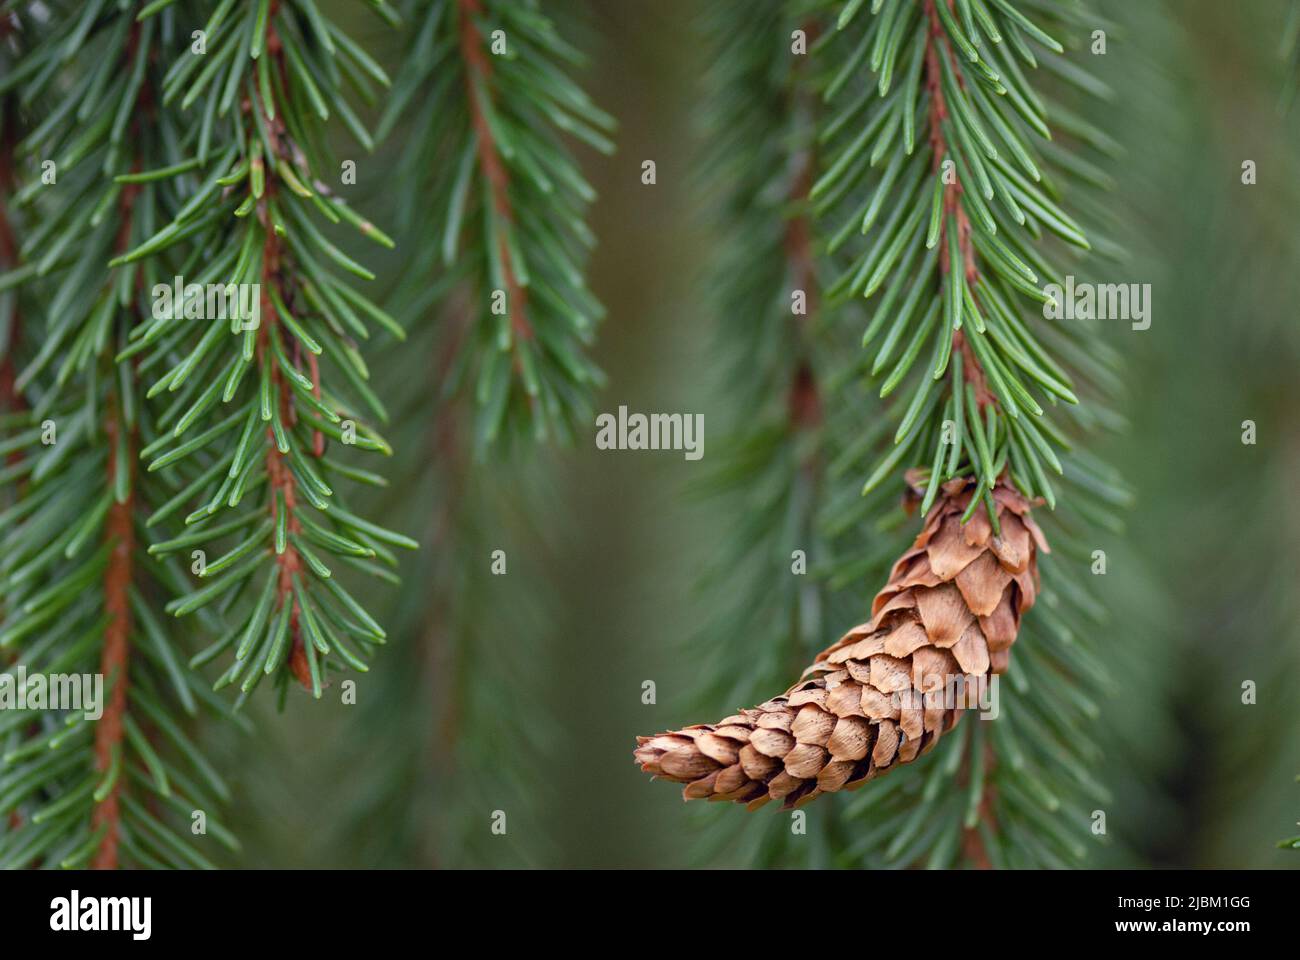 Weeping Norway Spruce (Picea abies f. pendula) branch with cone. Stock Photo